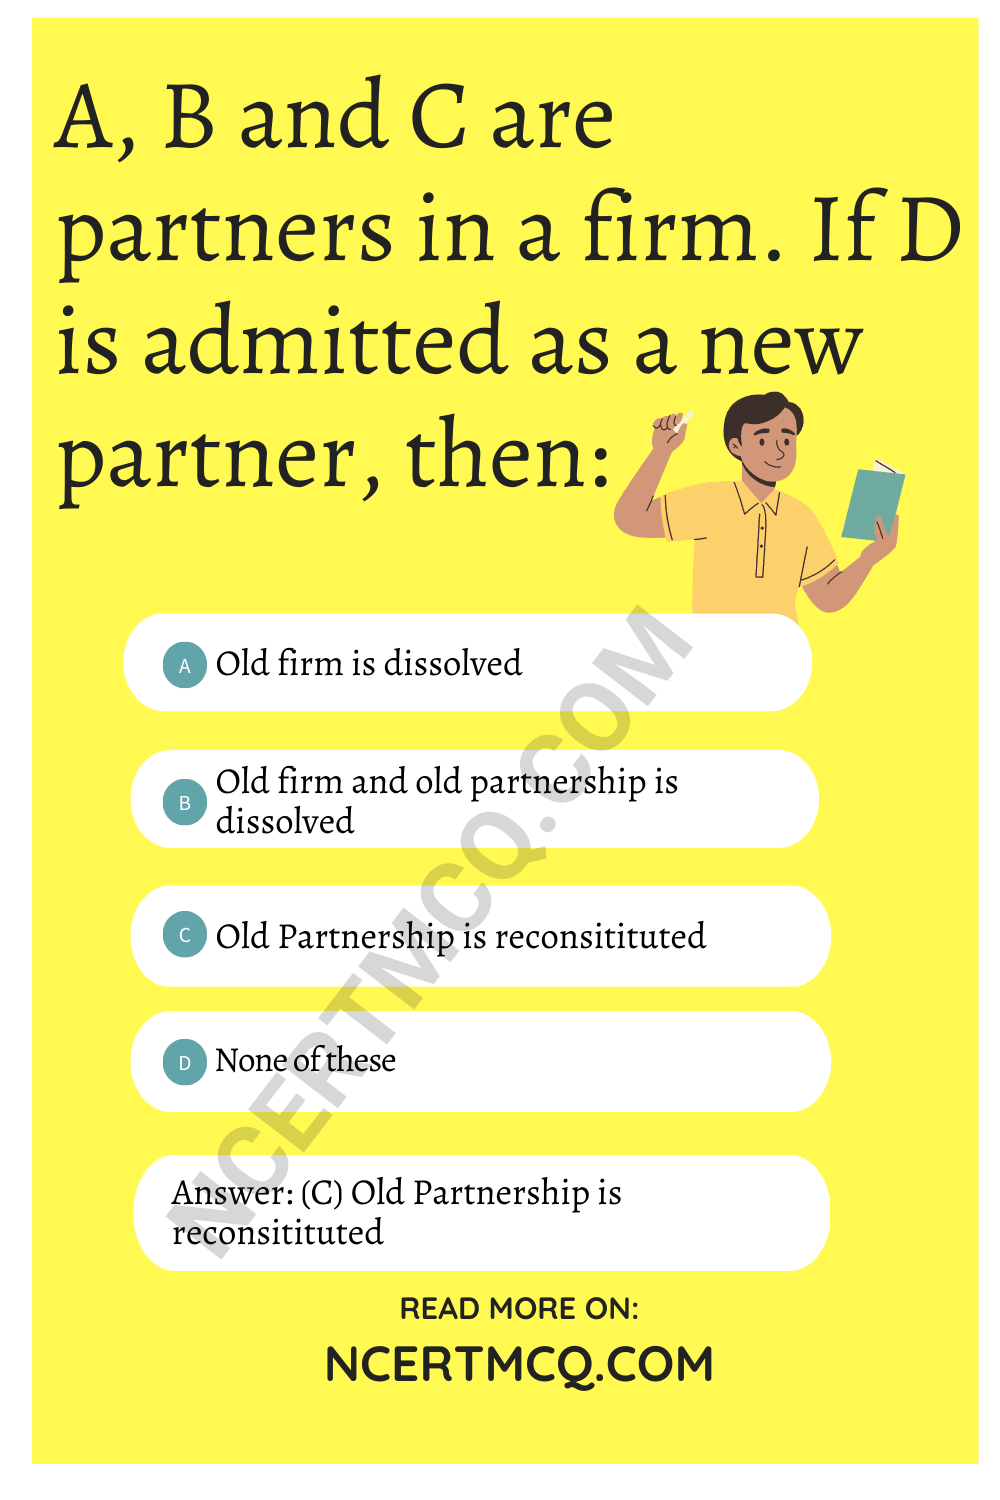 A, B and C are partners in a firm. If D is admitted as a new partner, then: